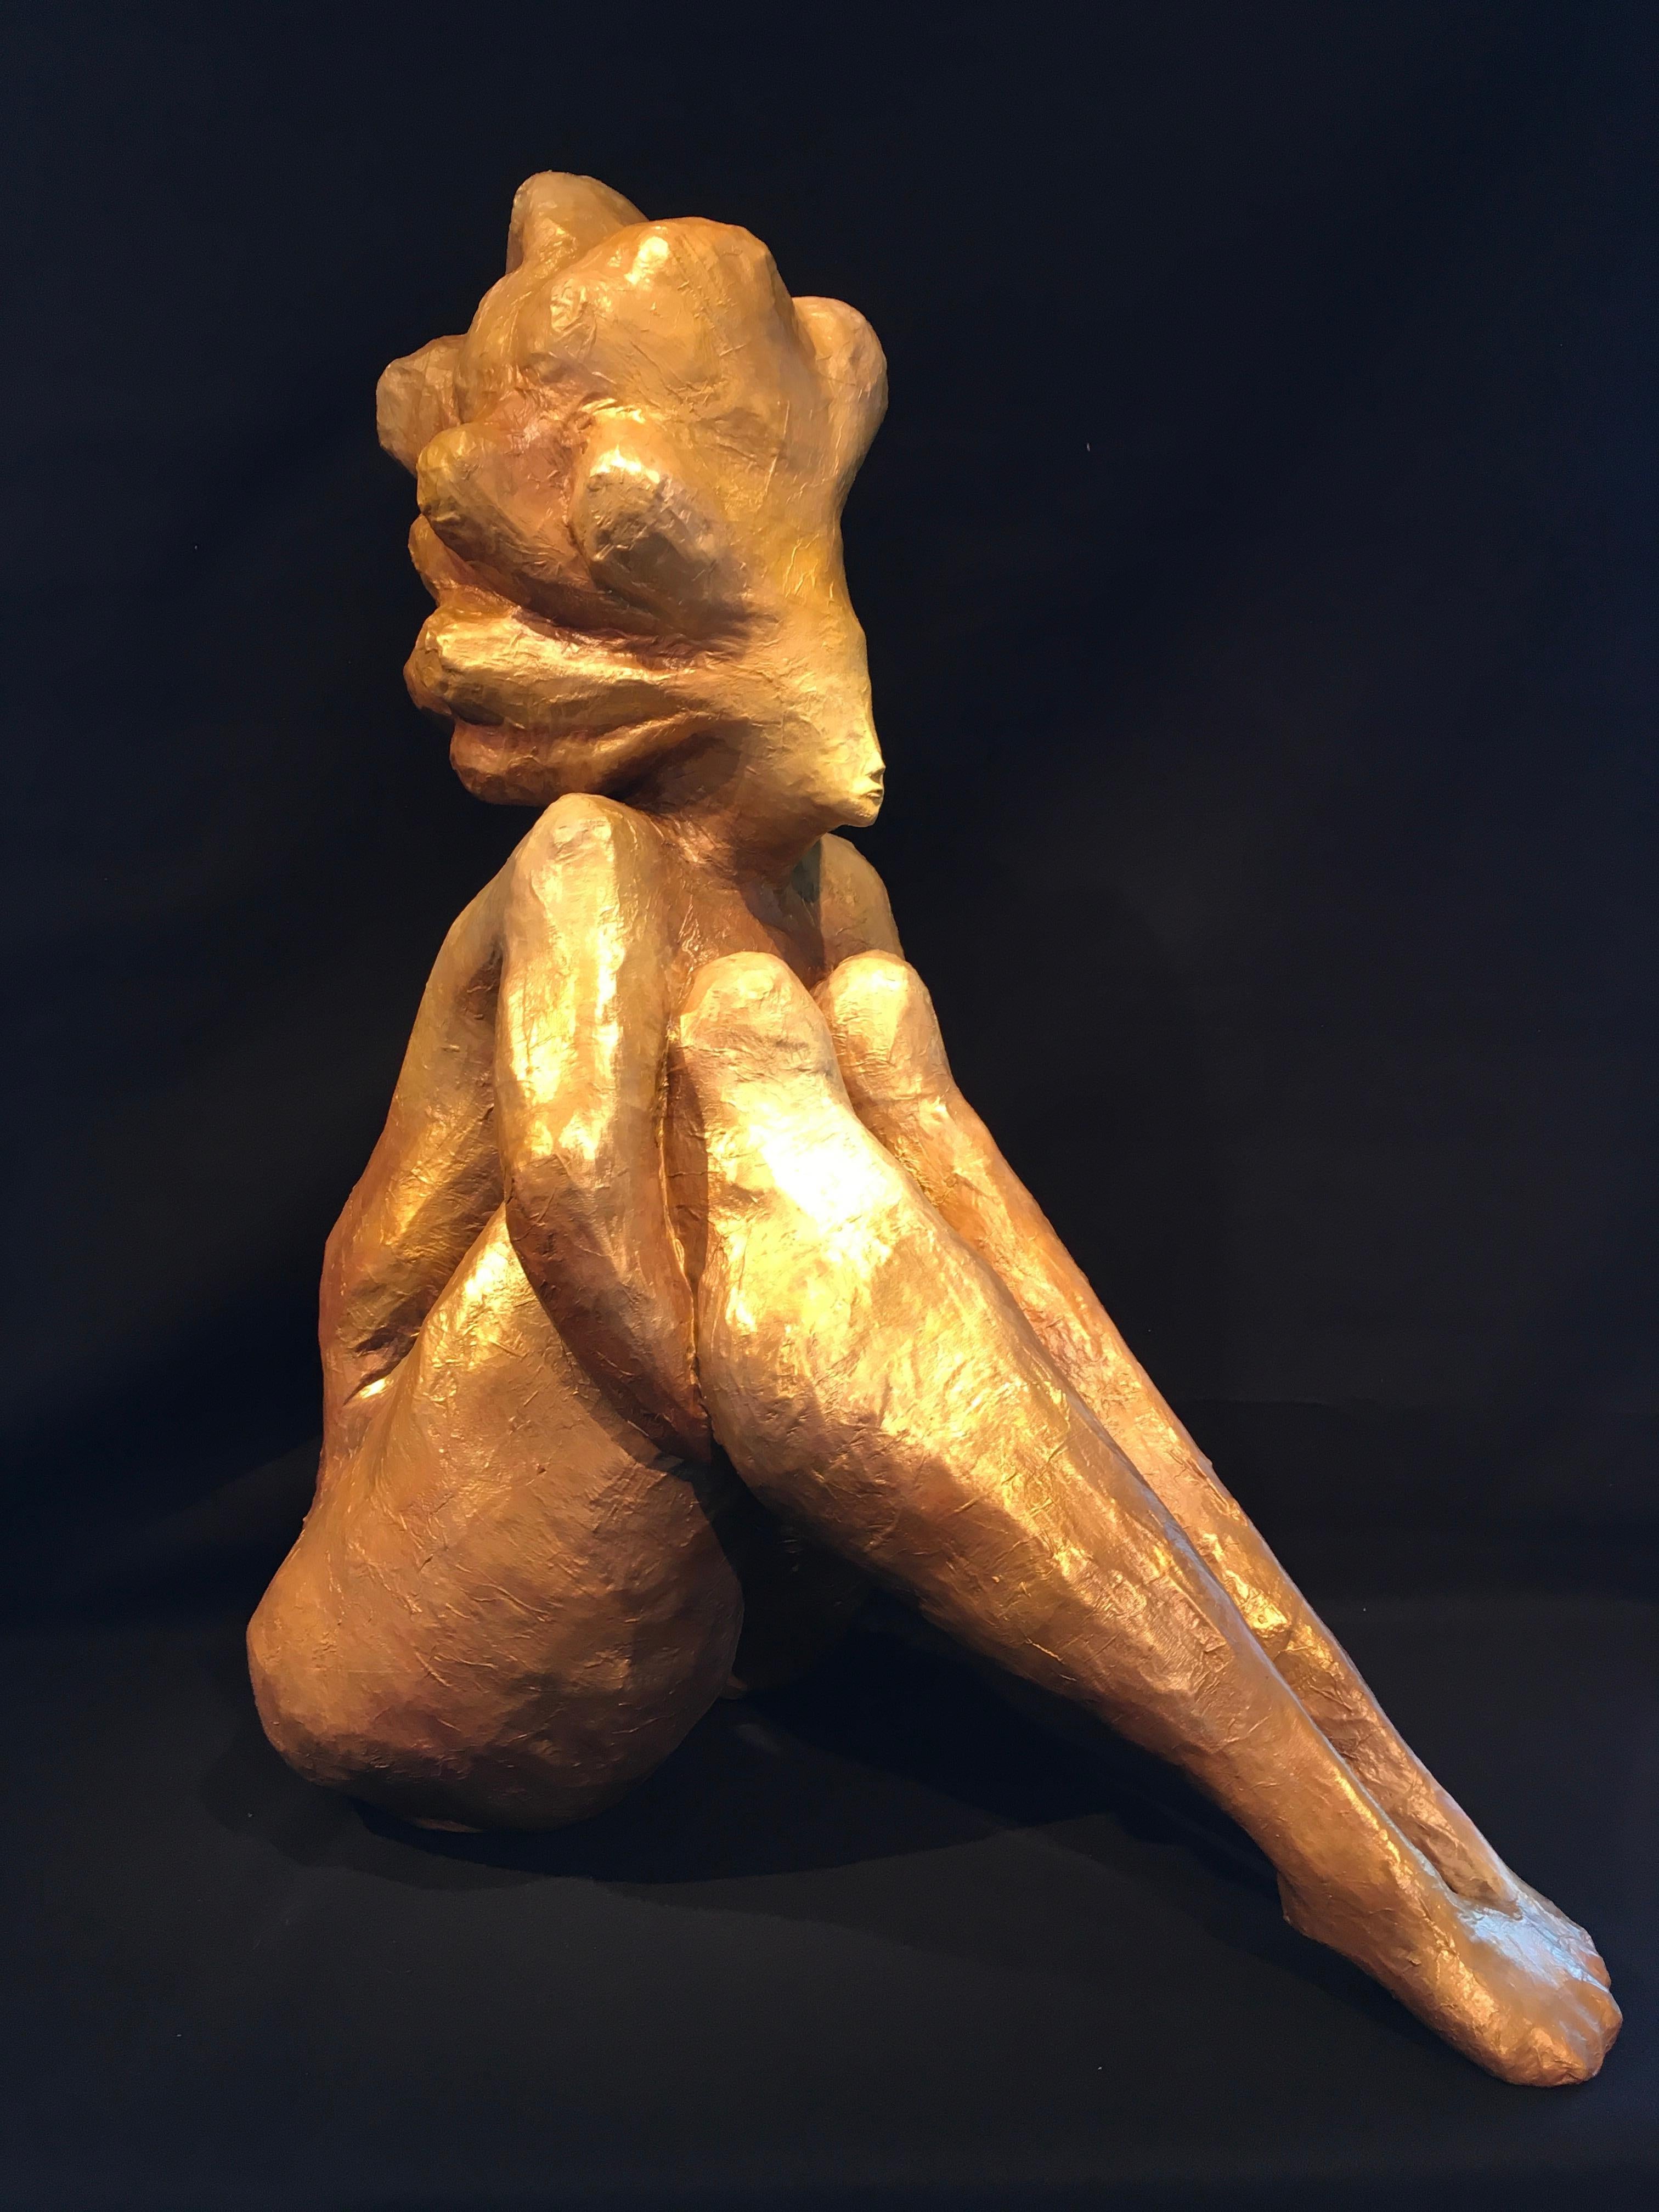 African-American artist Nathan Lee's mixed-media sculpture, 'To Contemplate' is a testament to the human spirit and the ability to rise above the maelstrom that life sometimes presents. There are times when one is left to celebrate and recognize